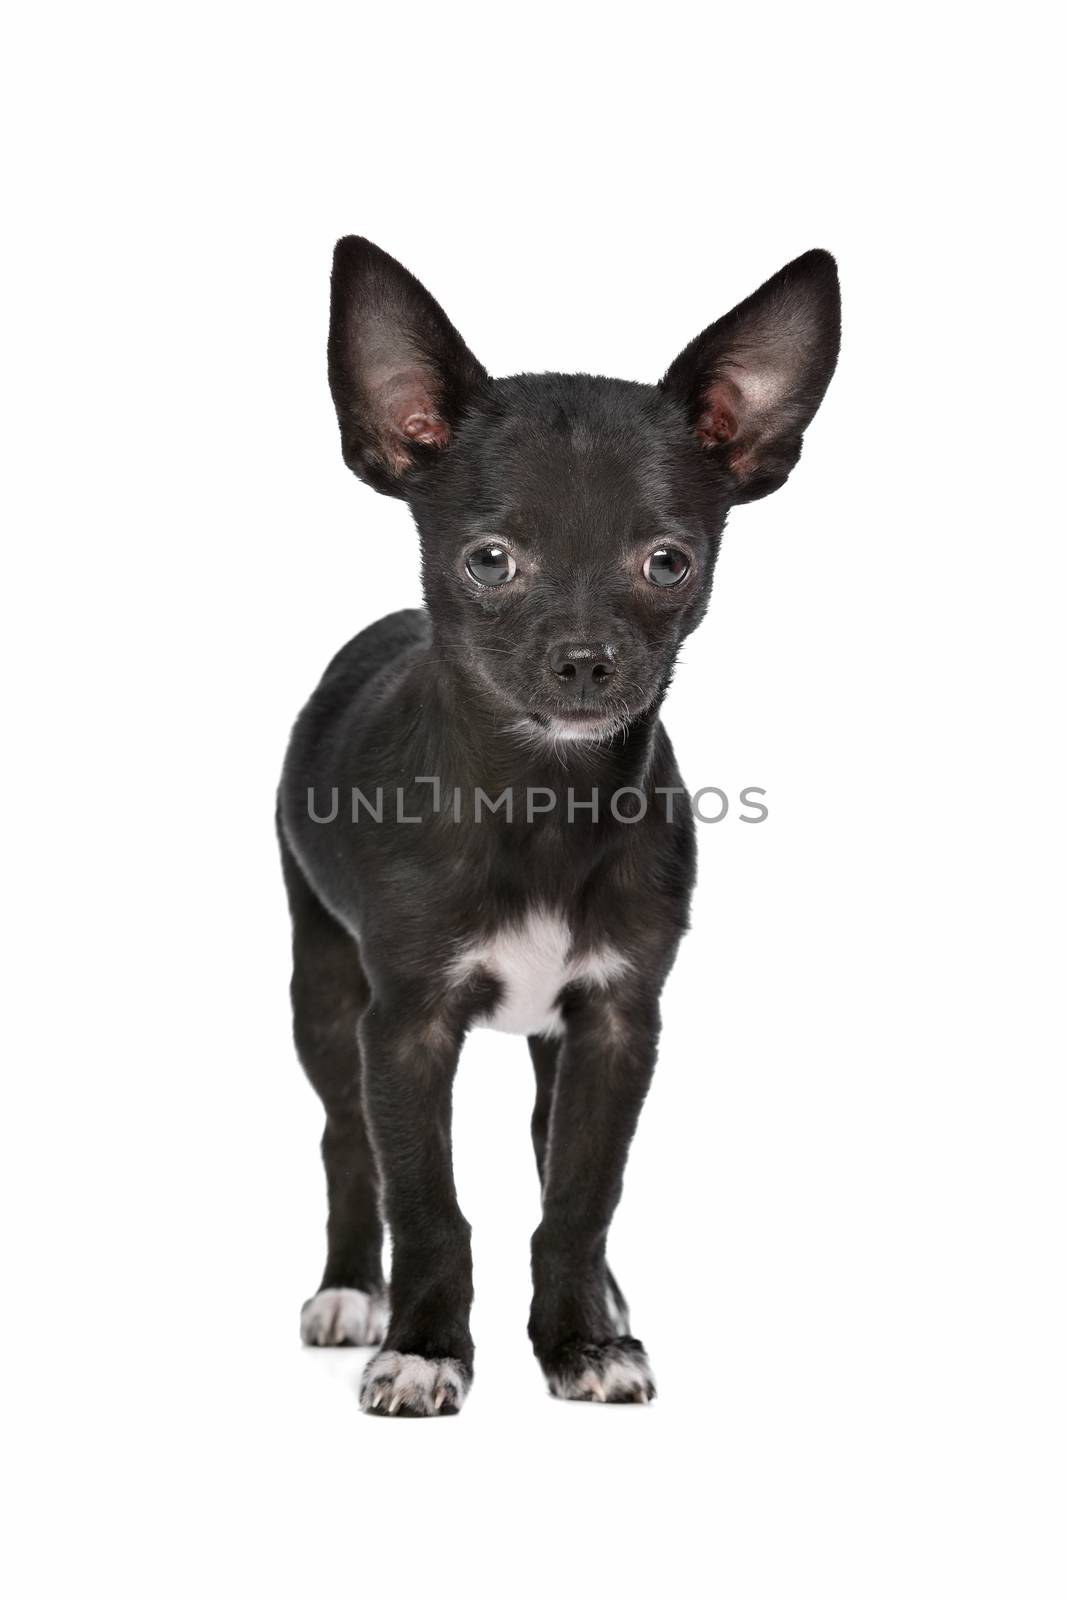 Black and white Chihuahua dog in front of a white background